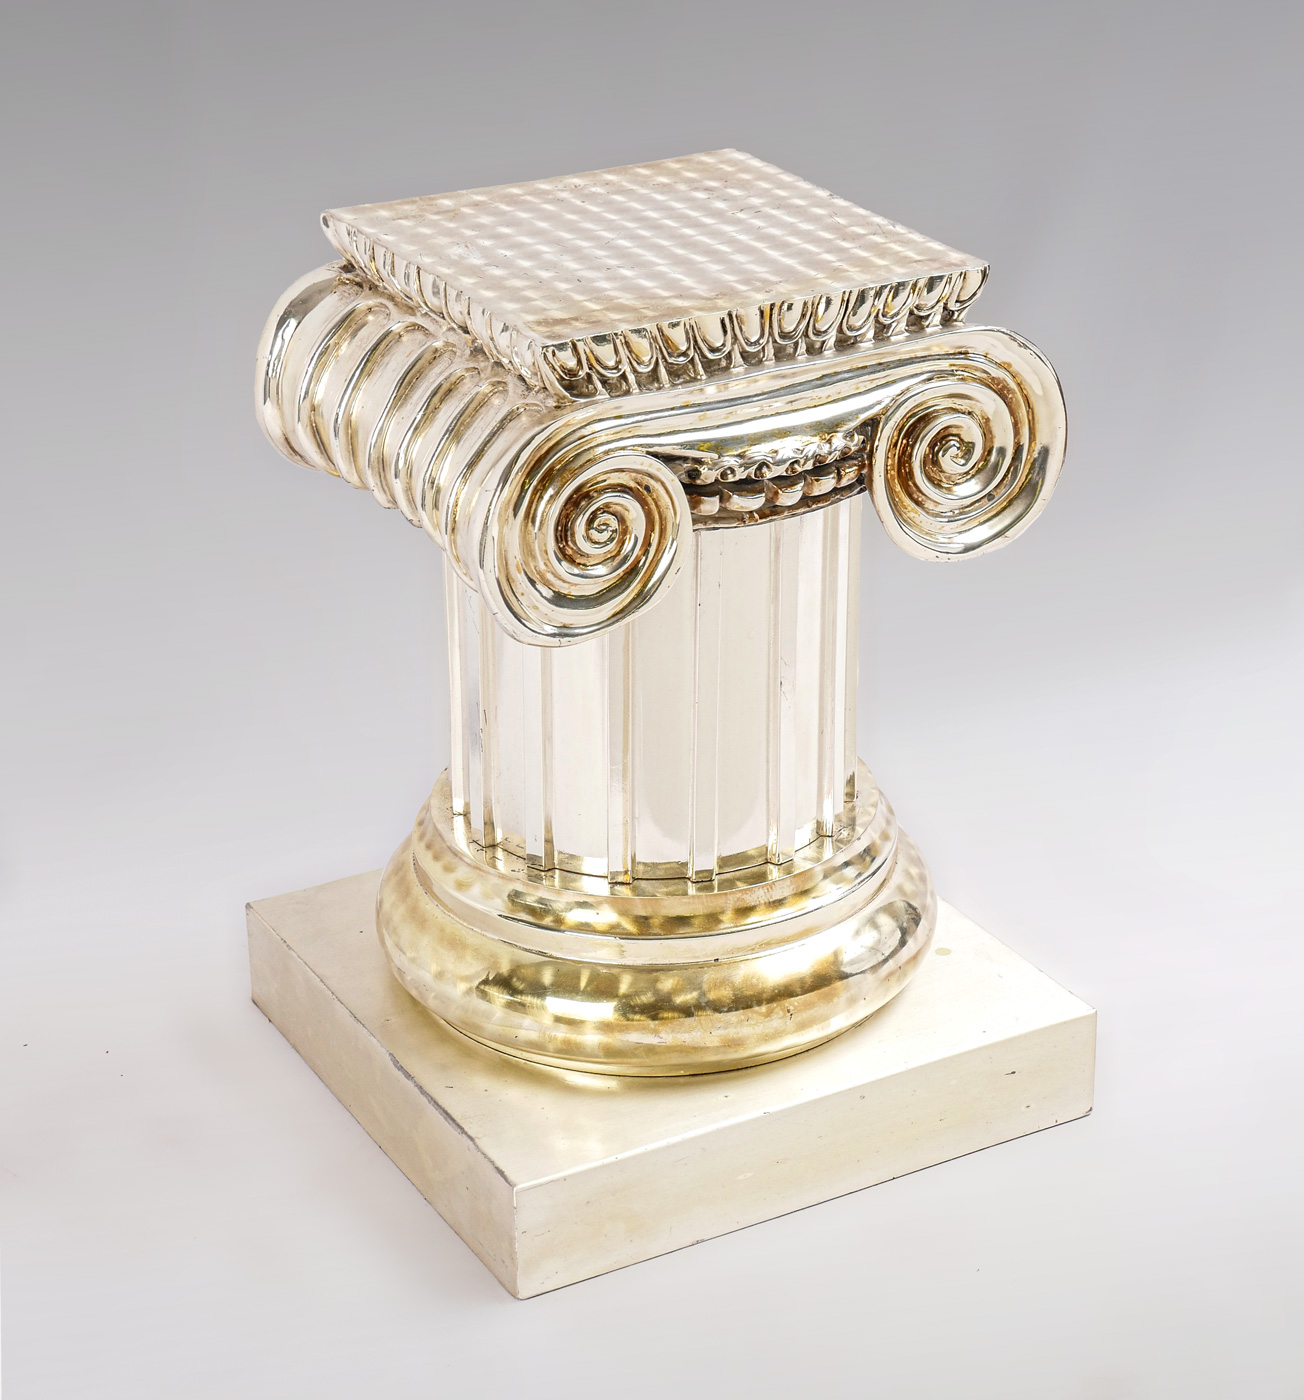 ITALIAN SILVER CLAD PEDESTAL: Carved